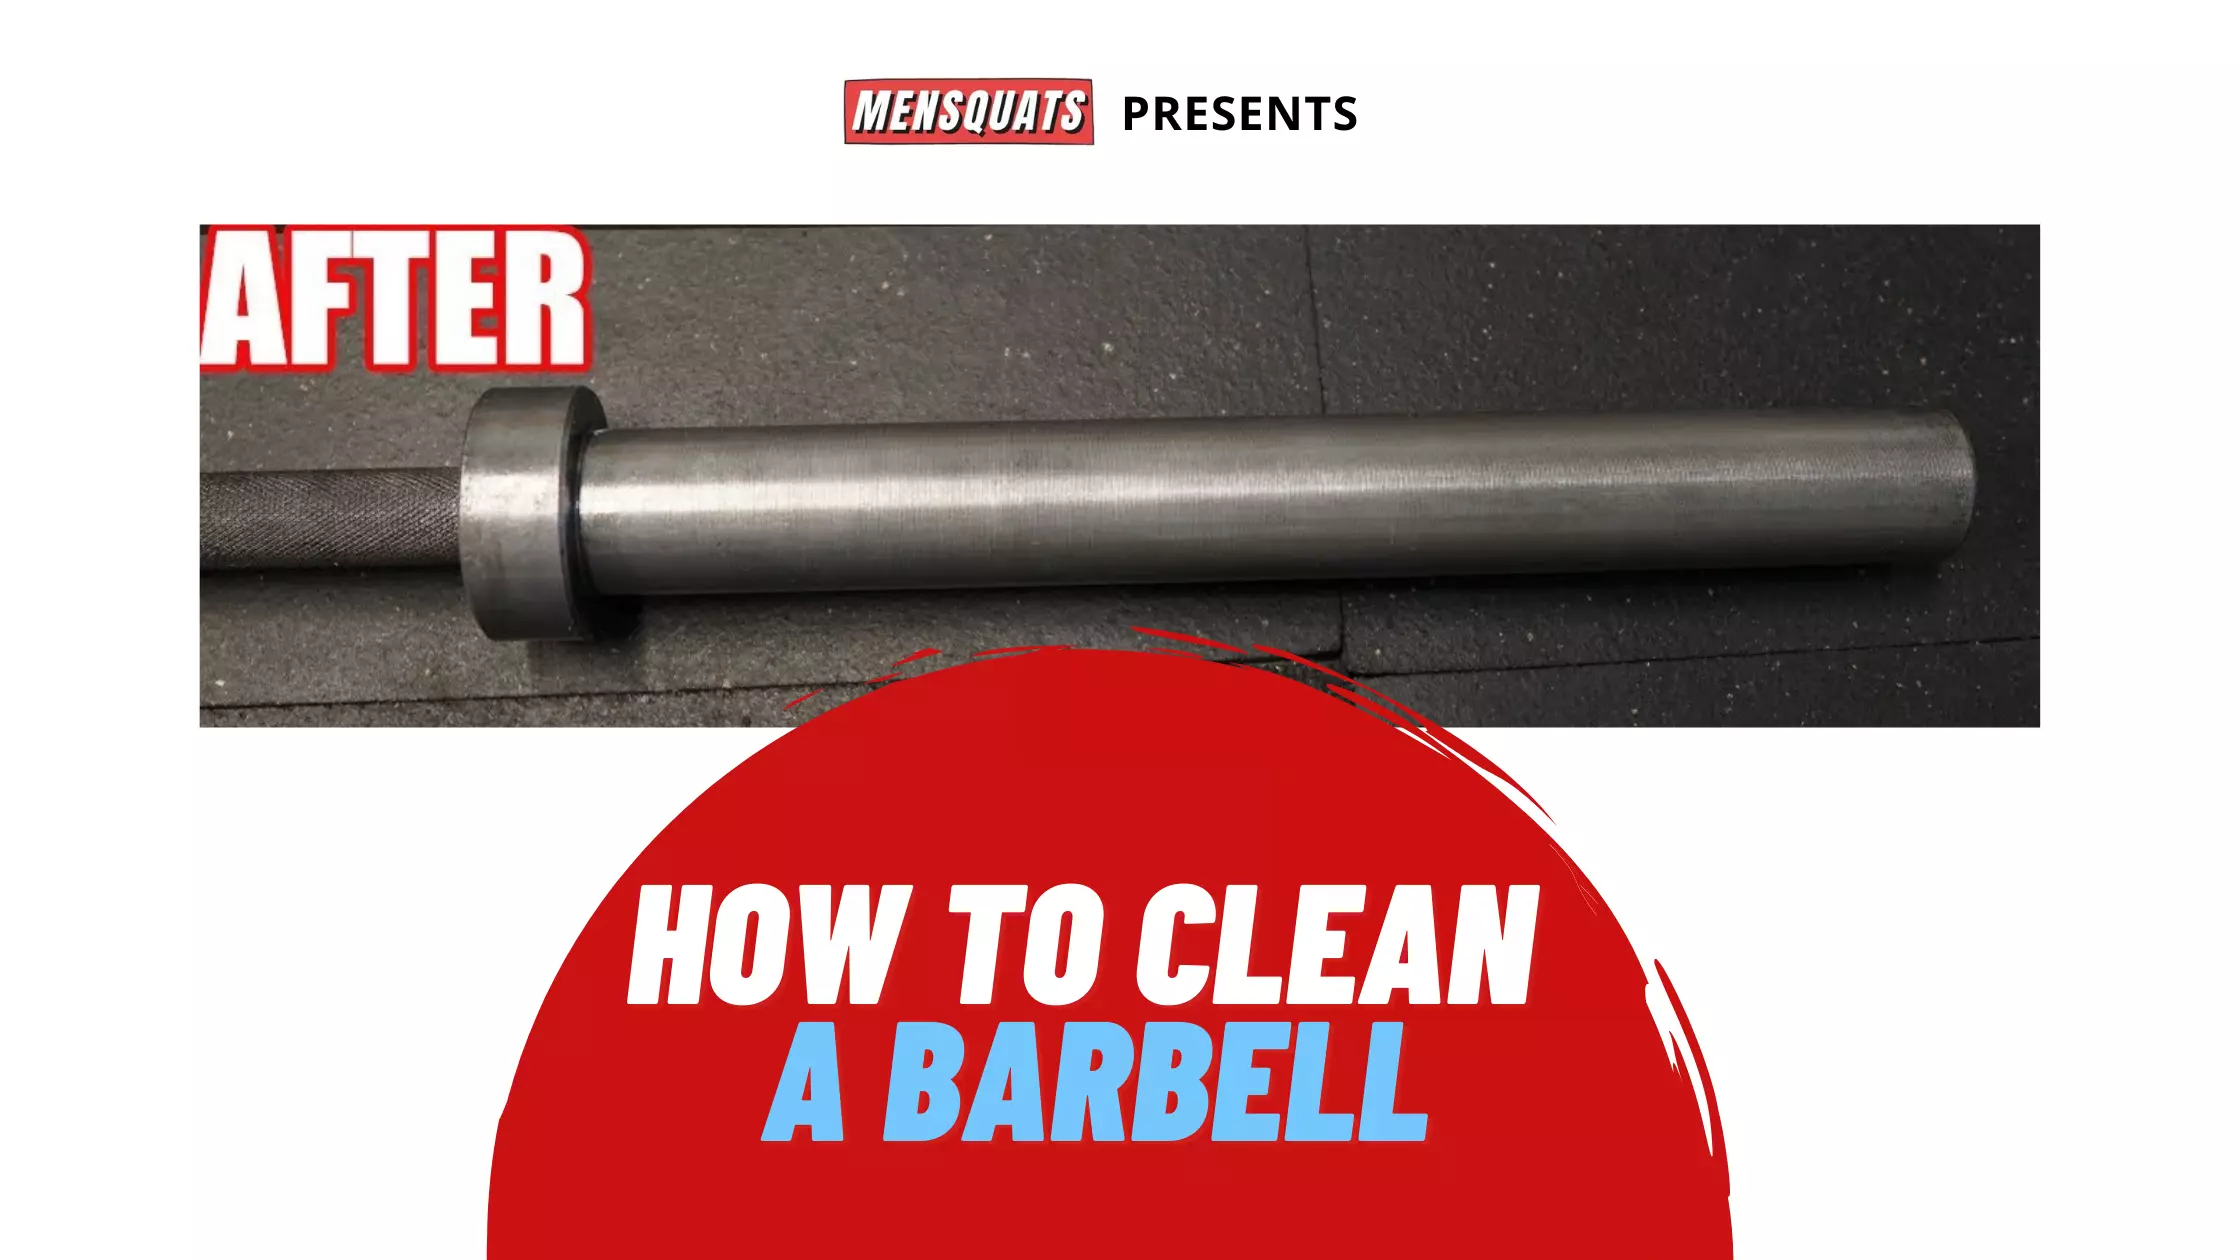 how to clean a rusty barbell mensquats